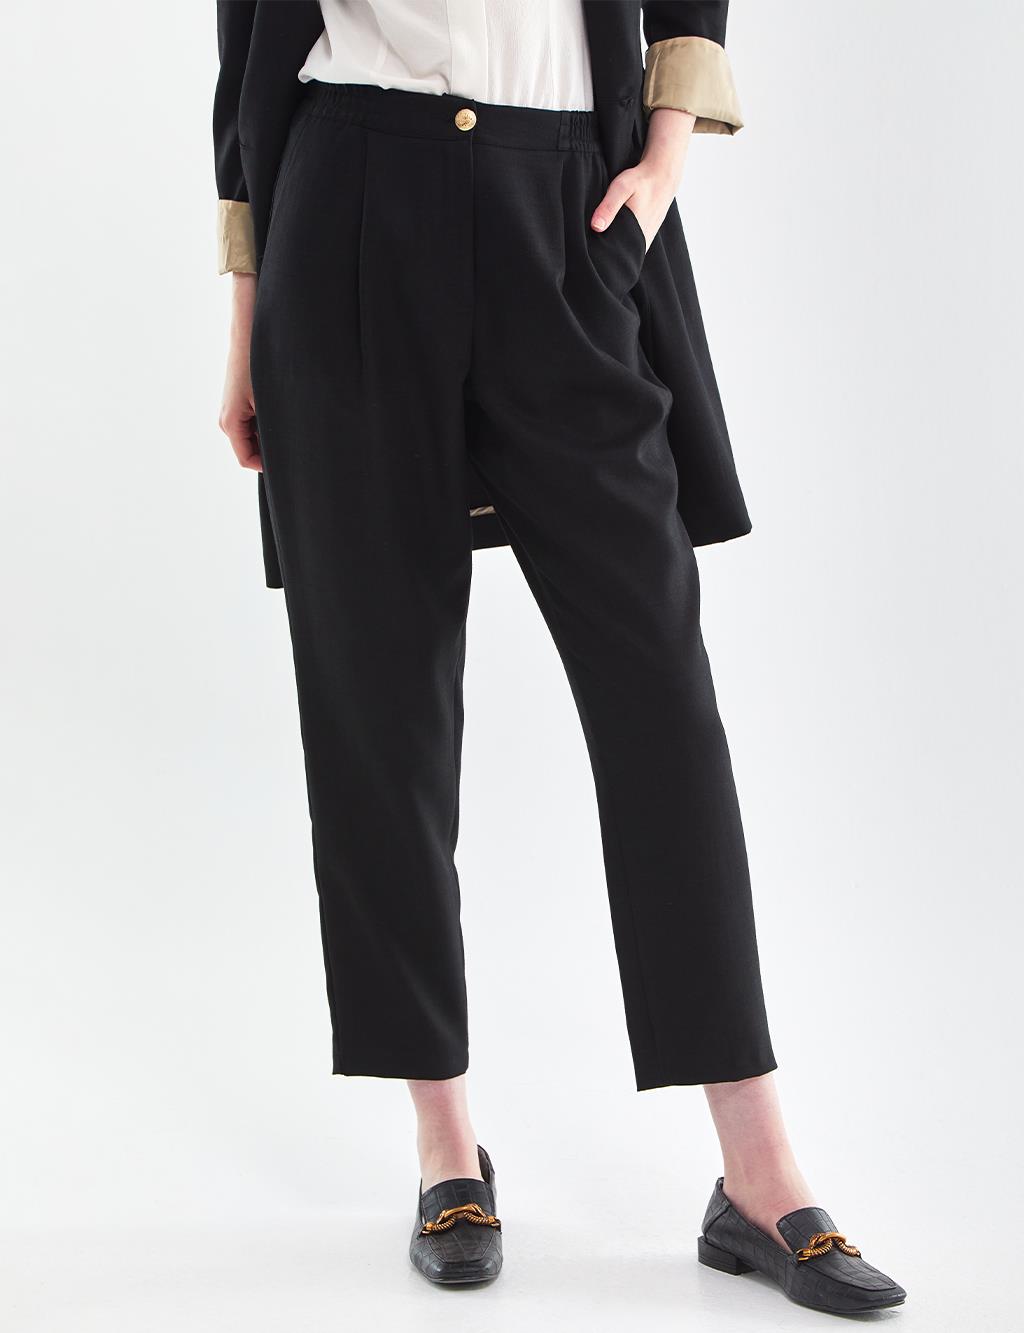 Double Breasted Jacket Pants Suit Black